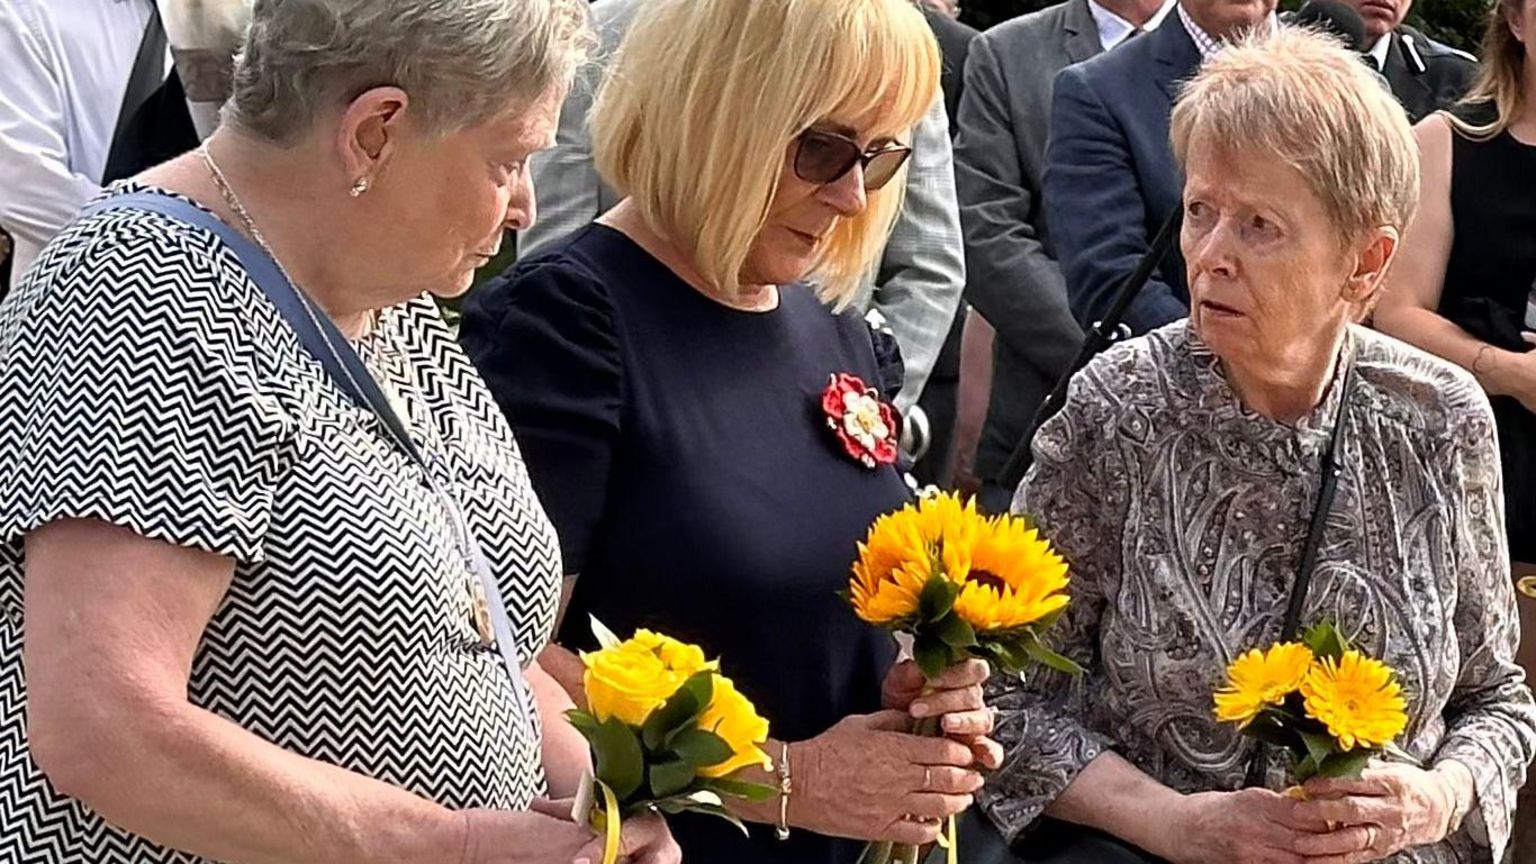 The mothers of Forbury gardens victims holding yellow sunflowers